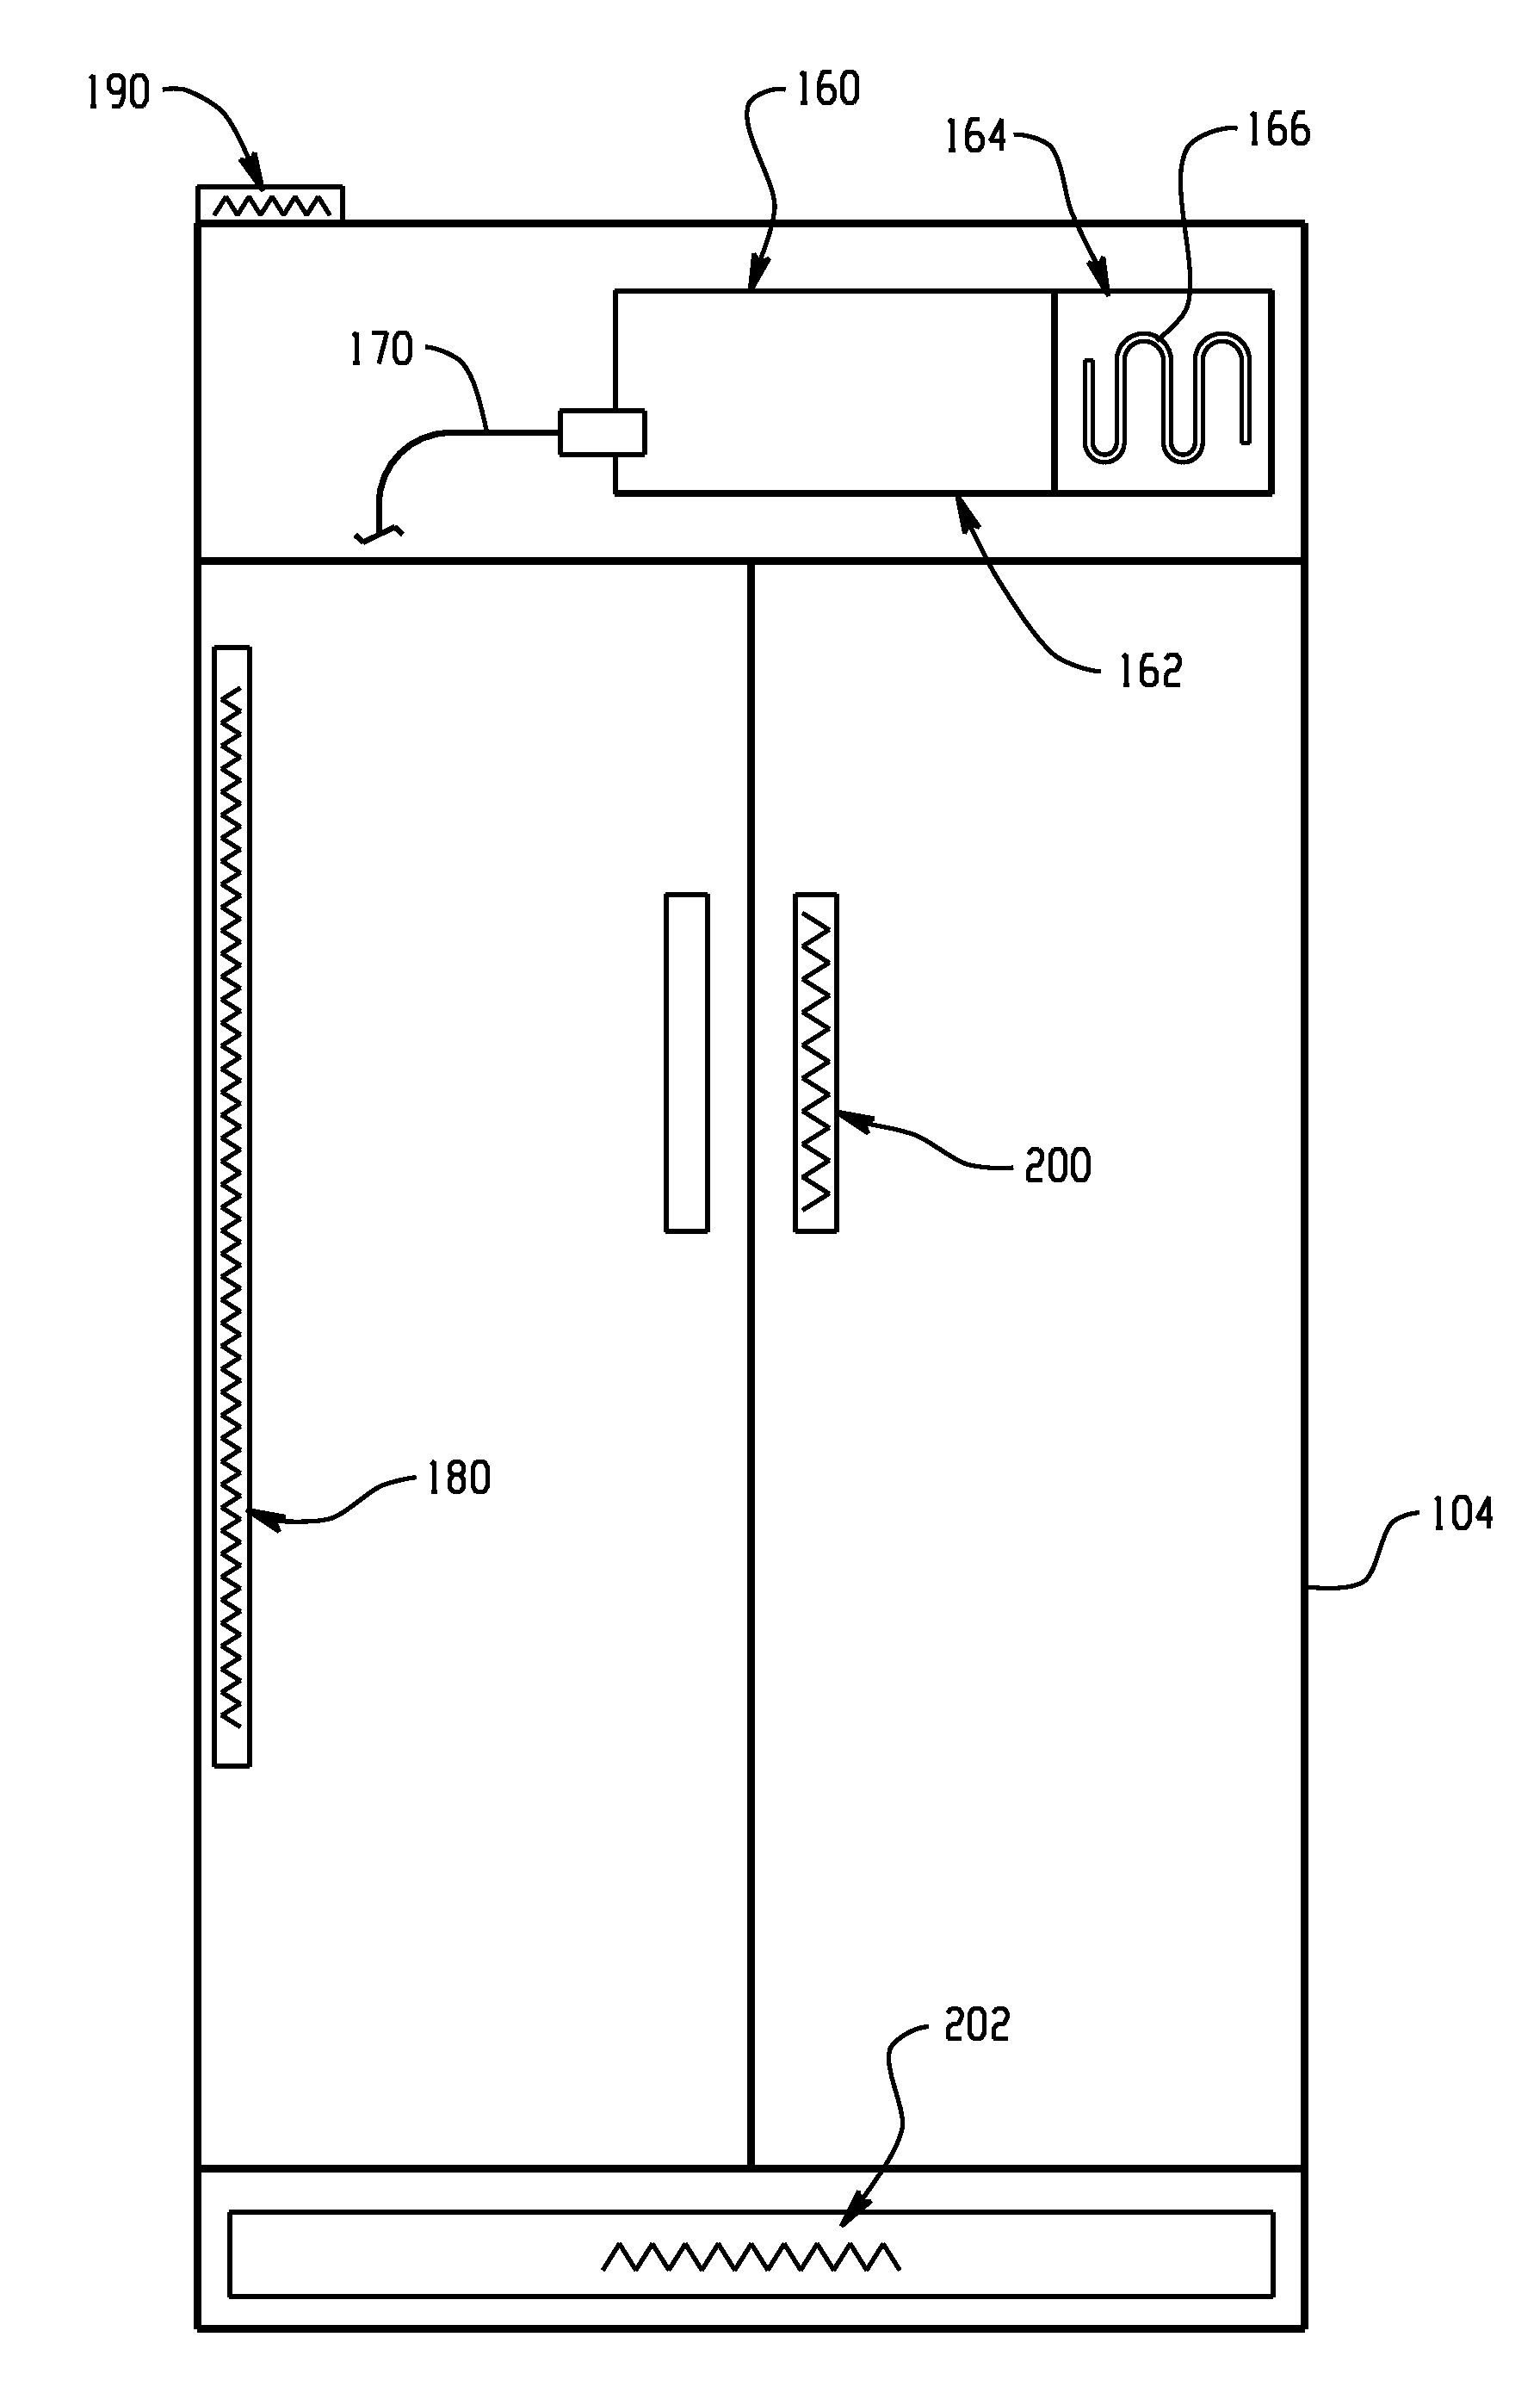 Appliance demand response antenna design for improved gain within the home appliance network